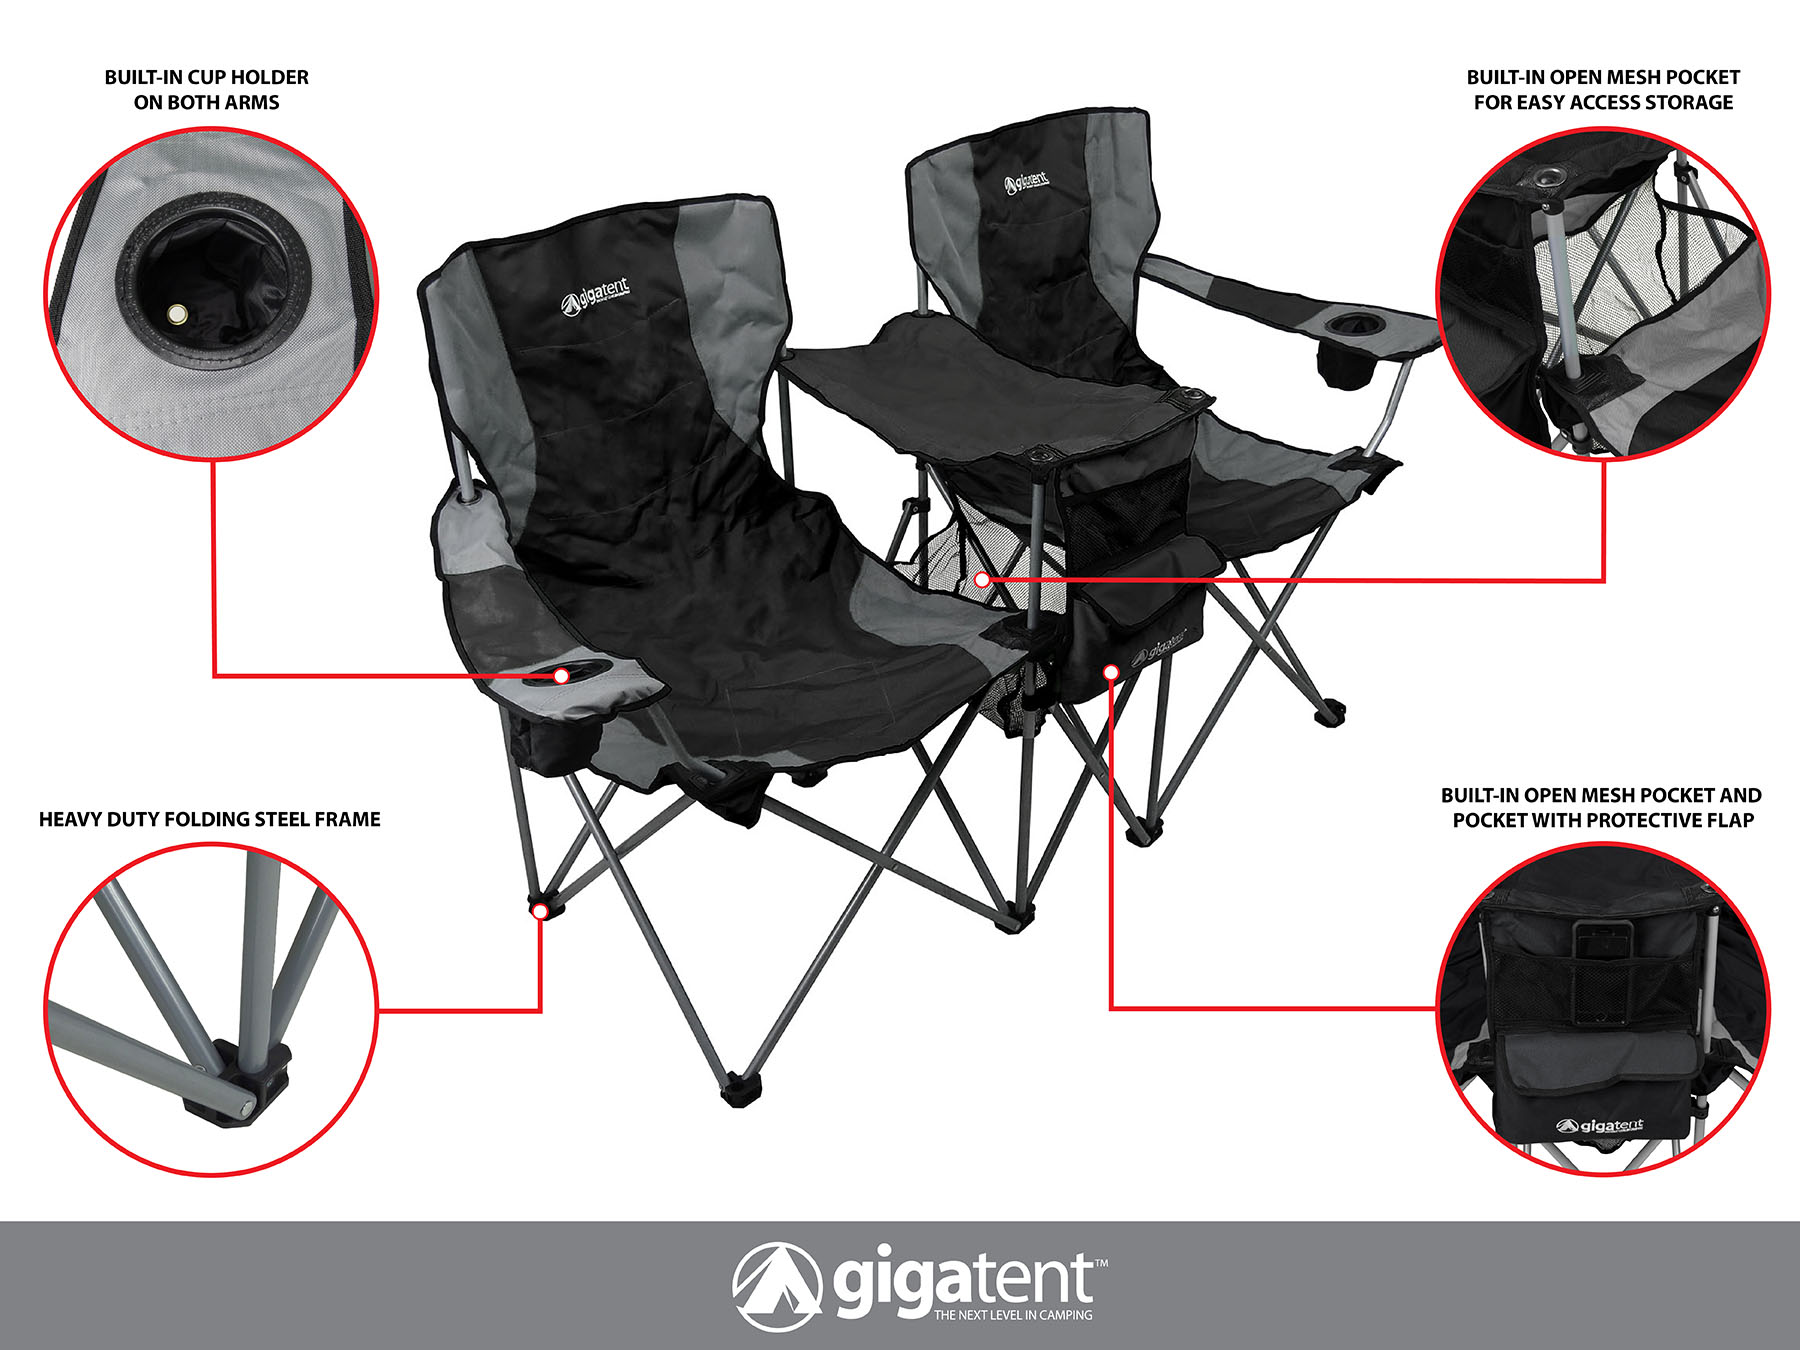 GigaTent Double Outdoor Chairs – 2 Side by Side Folding Quad Camping Seats, Black - image 2 of 5